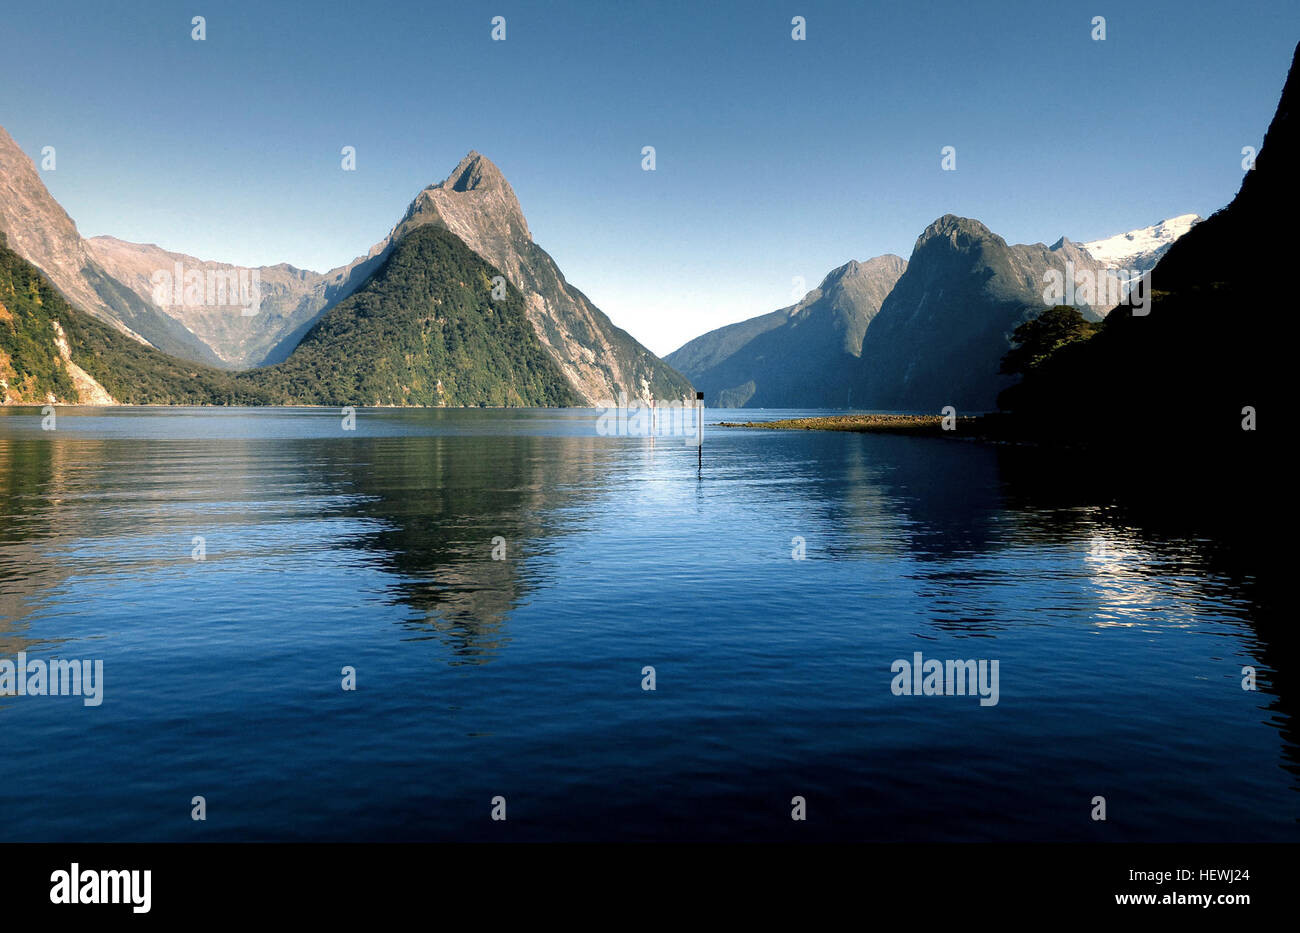 Milford Sound is a fiord in the south west of New Zealand's South Island, within Fiordland National Park, Piopiotahi Marine Reserve, and the Te Wahipounamu World Heritage site. Stock Photo